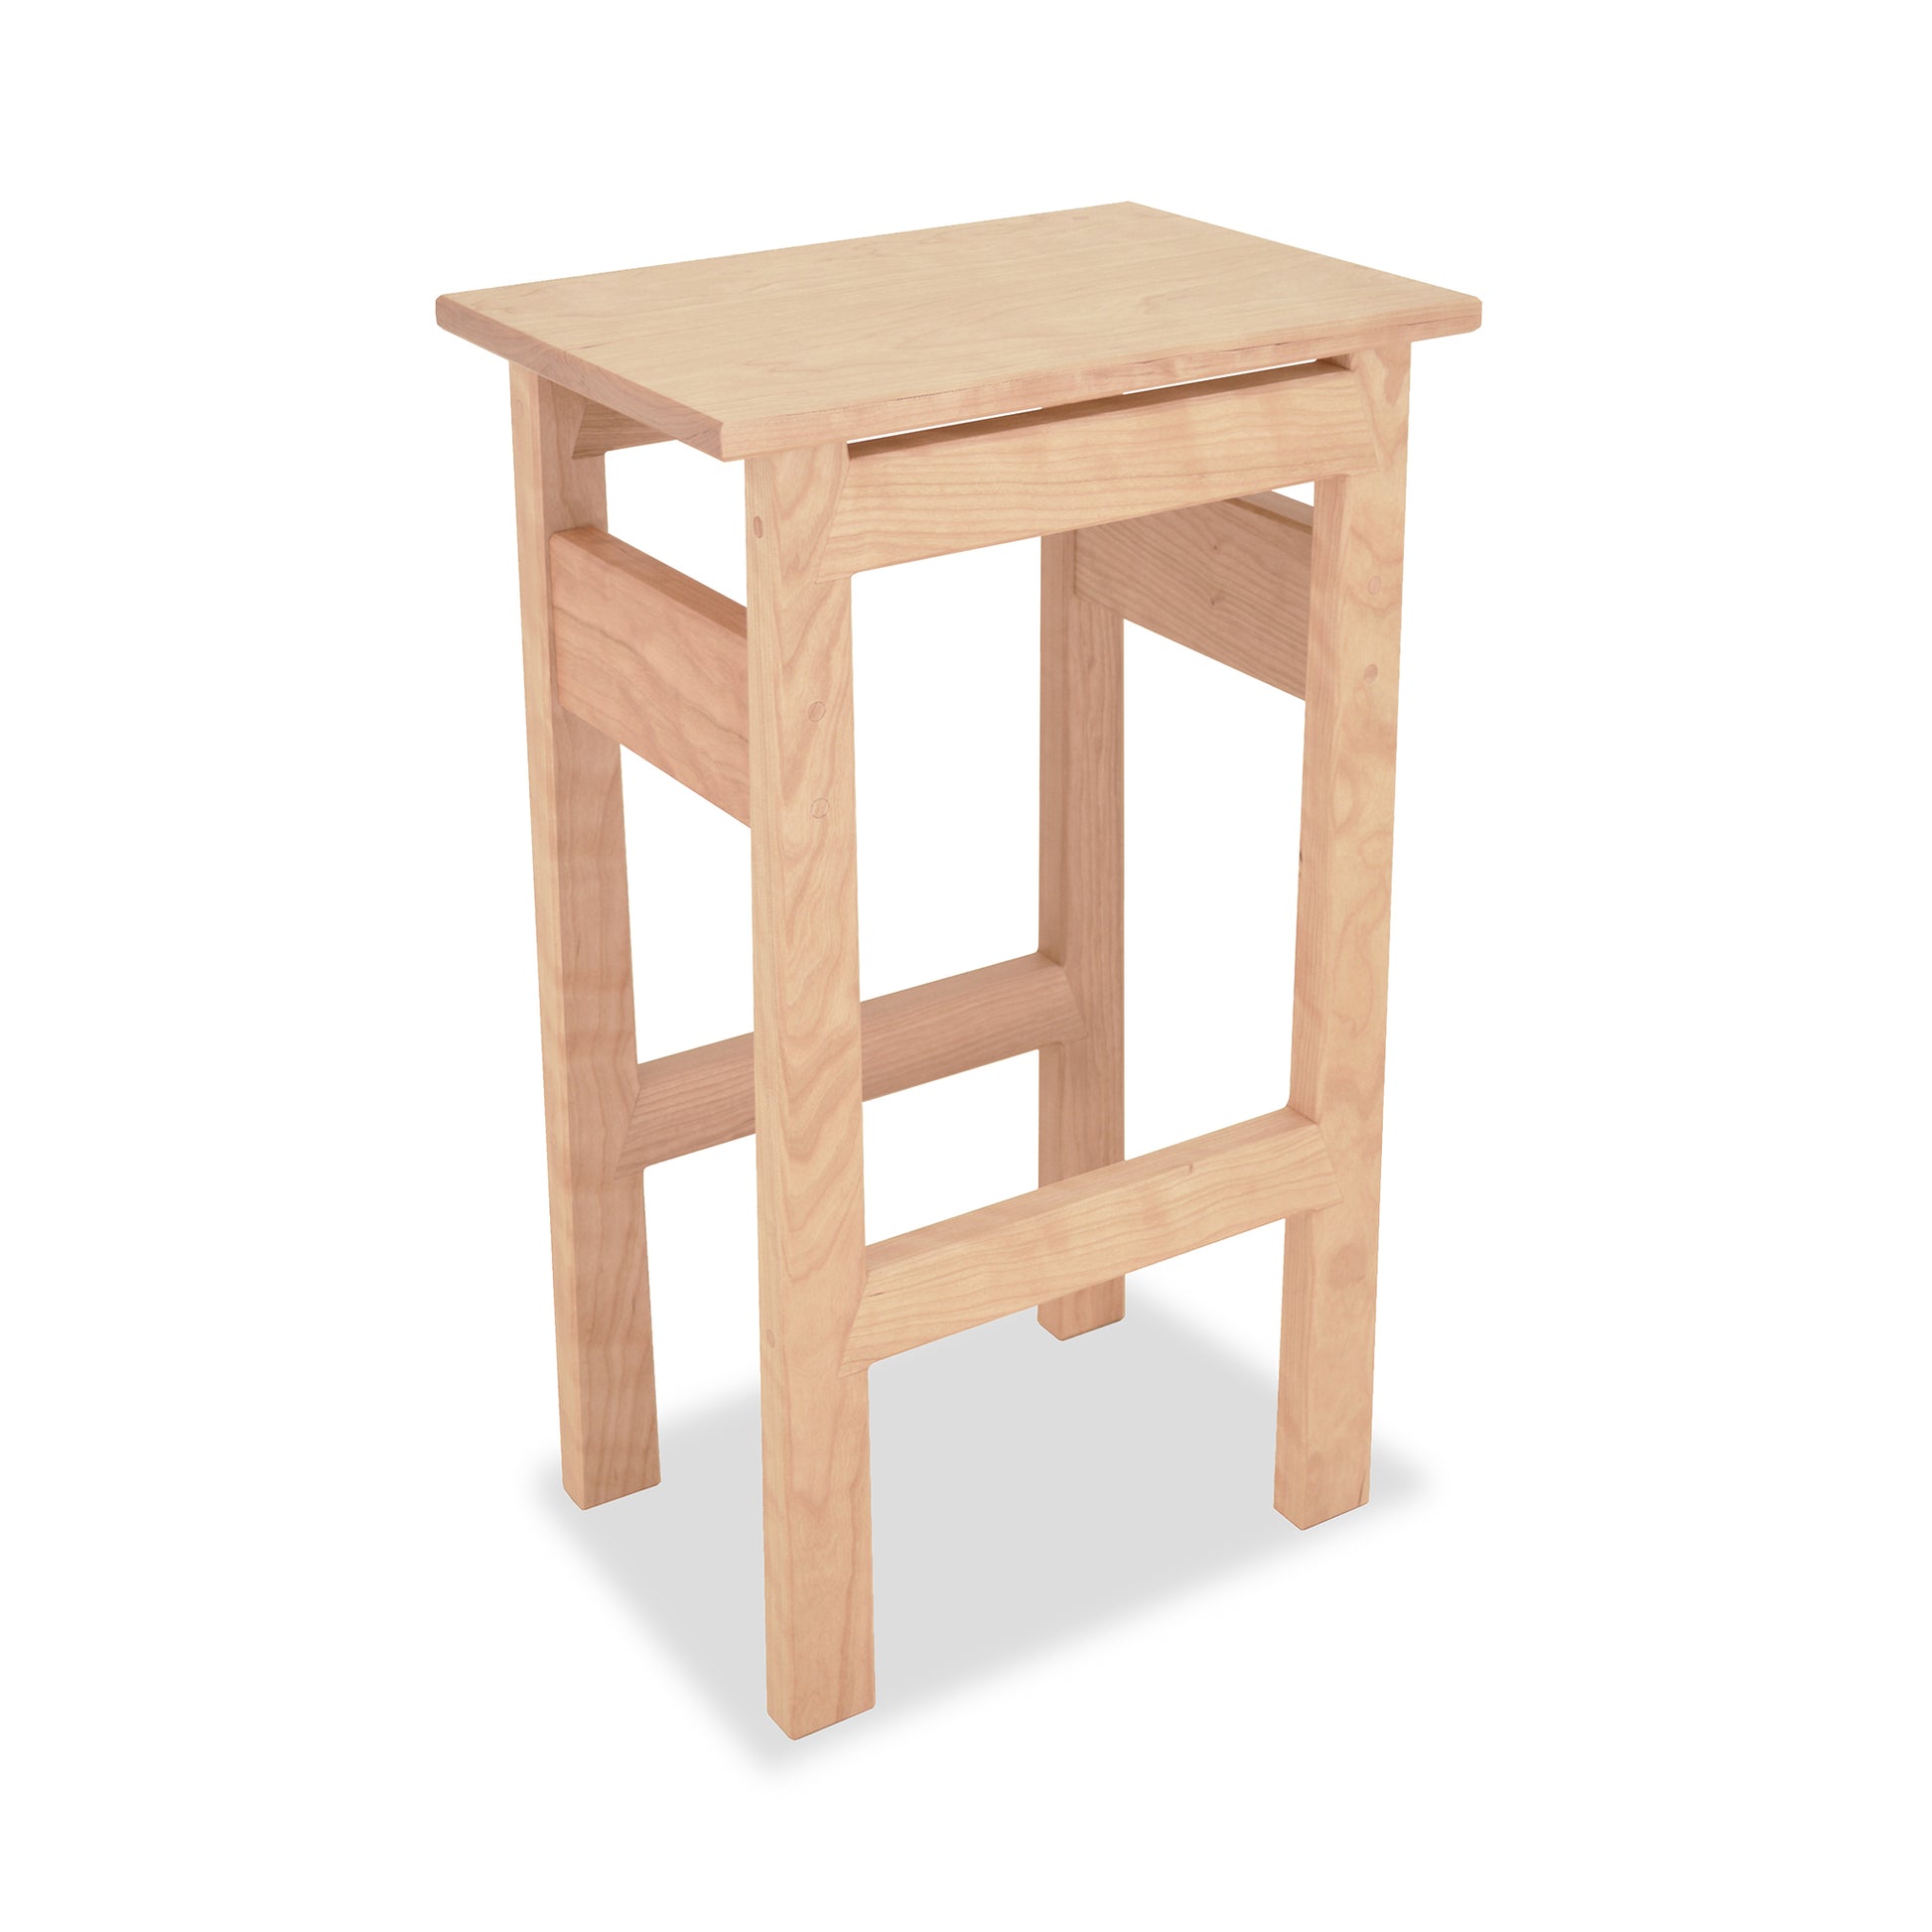 A Maple Corner Woodworks' Contemporary Asian Stool on a white background, showcasing its natural wood beauty.